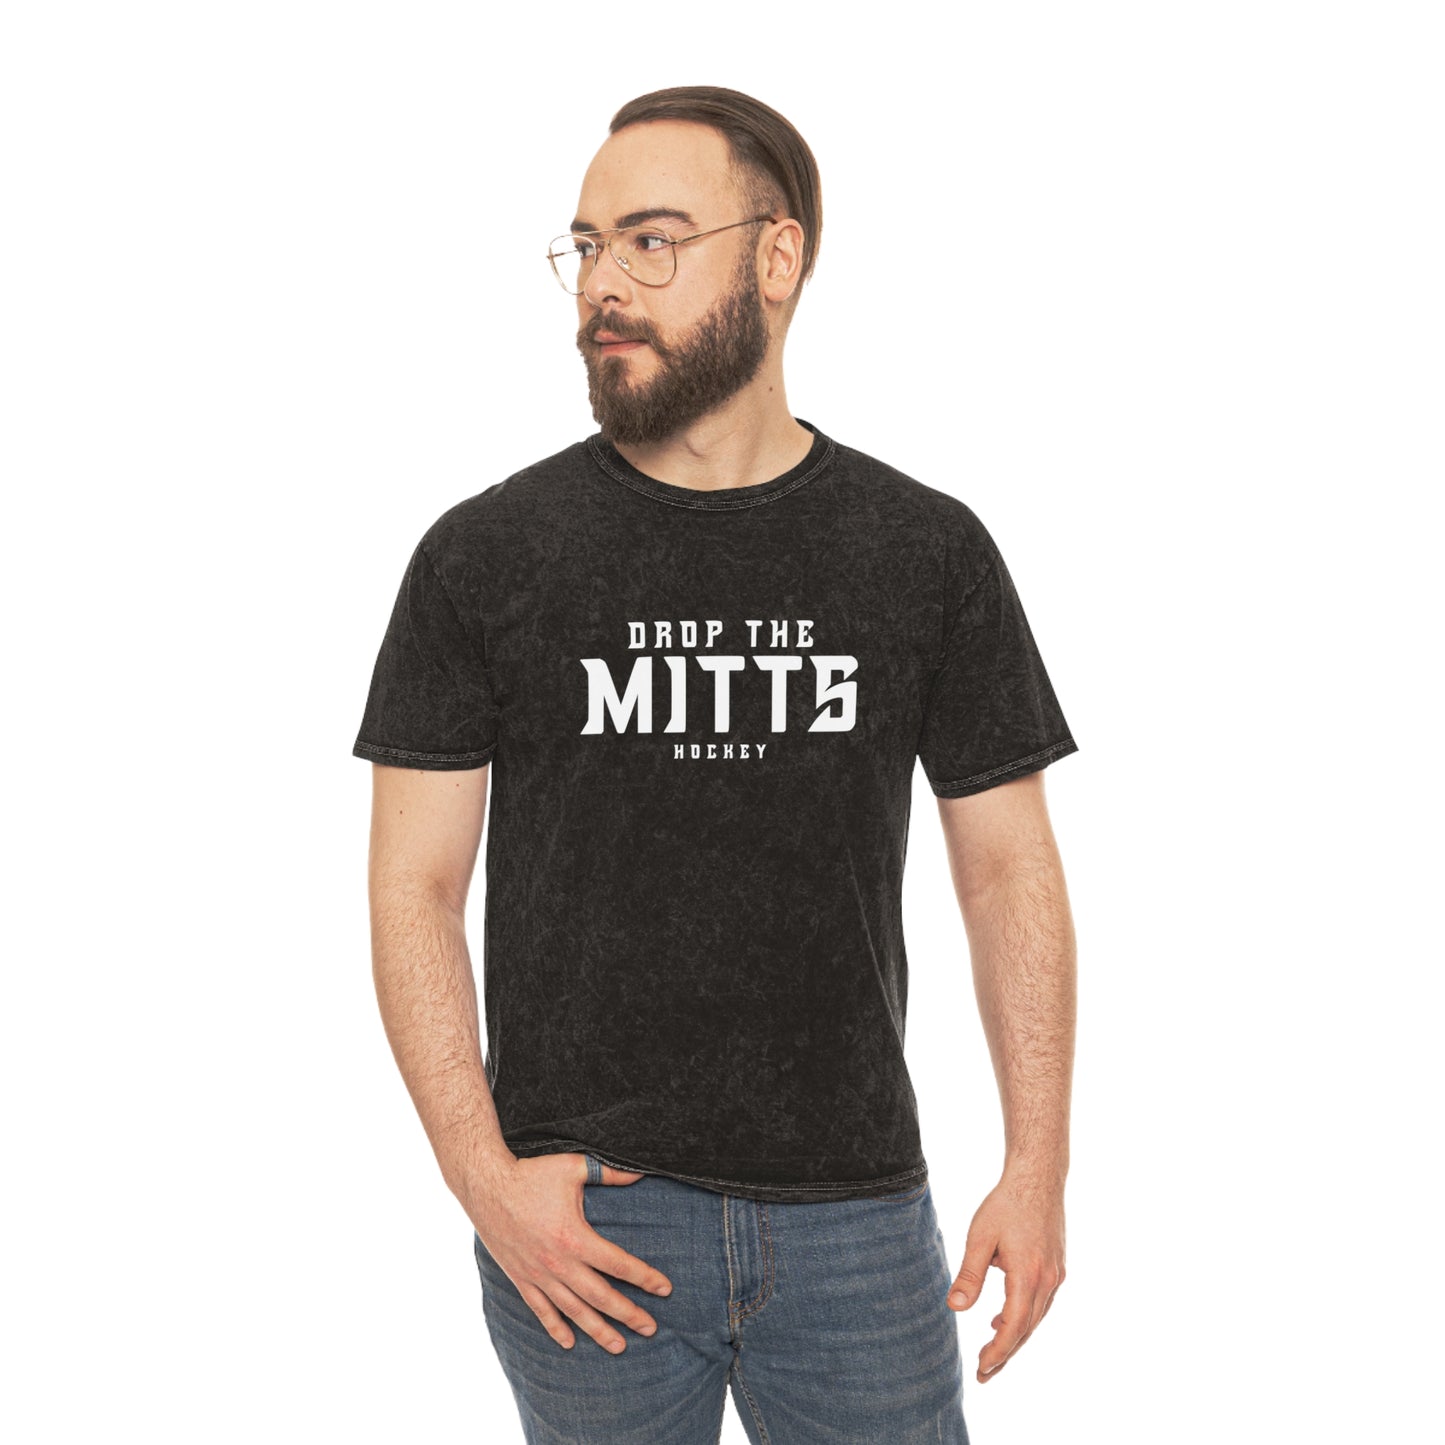 Drop The Mitts Unisex Mineral Wash T-Shirt